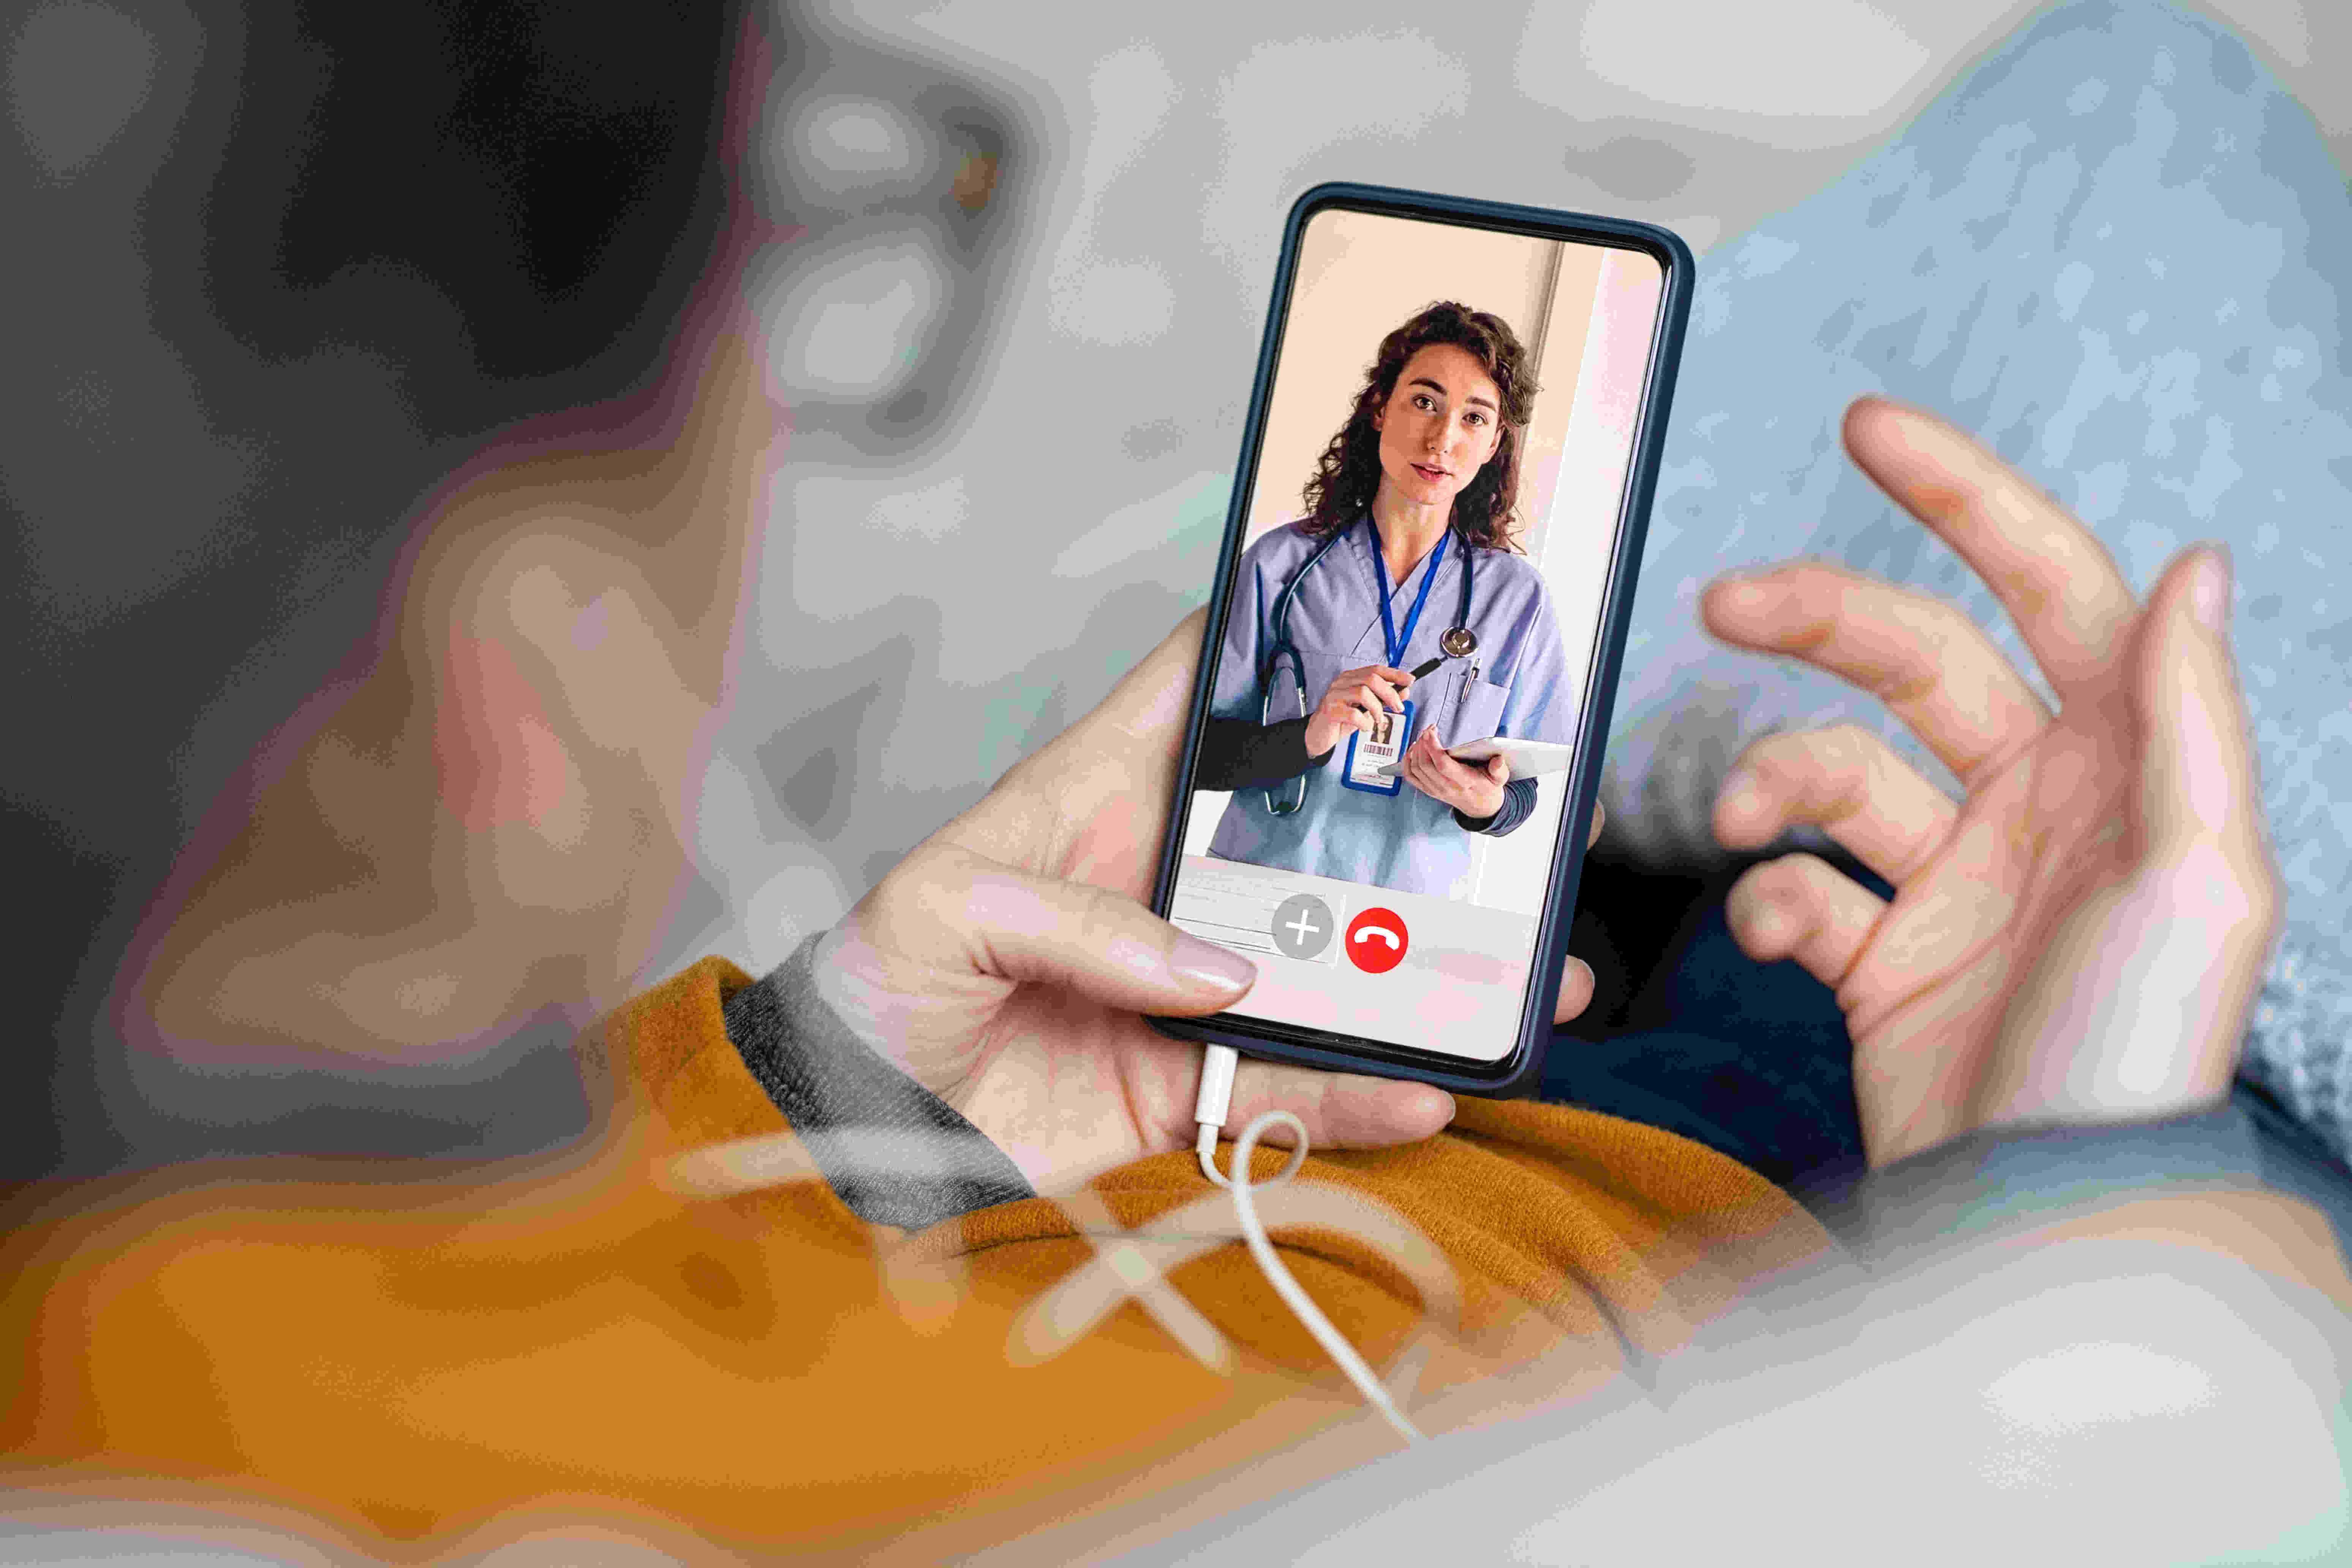 Pay Attention to Legislative, Regulatory Changes In Telehealth